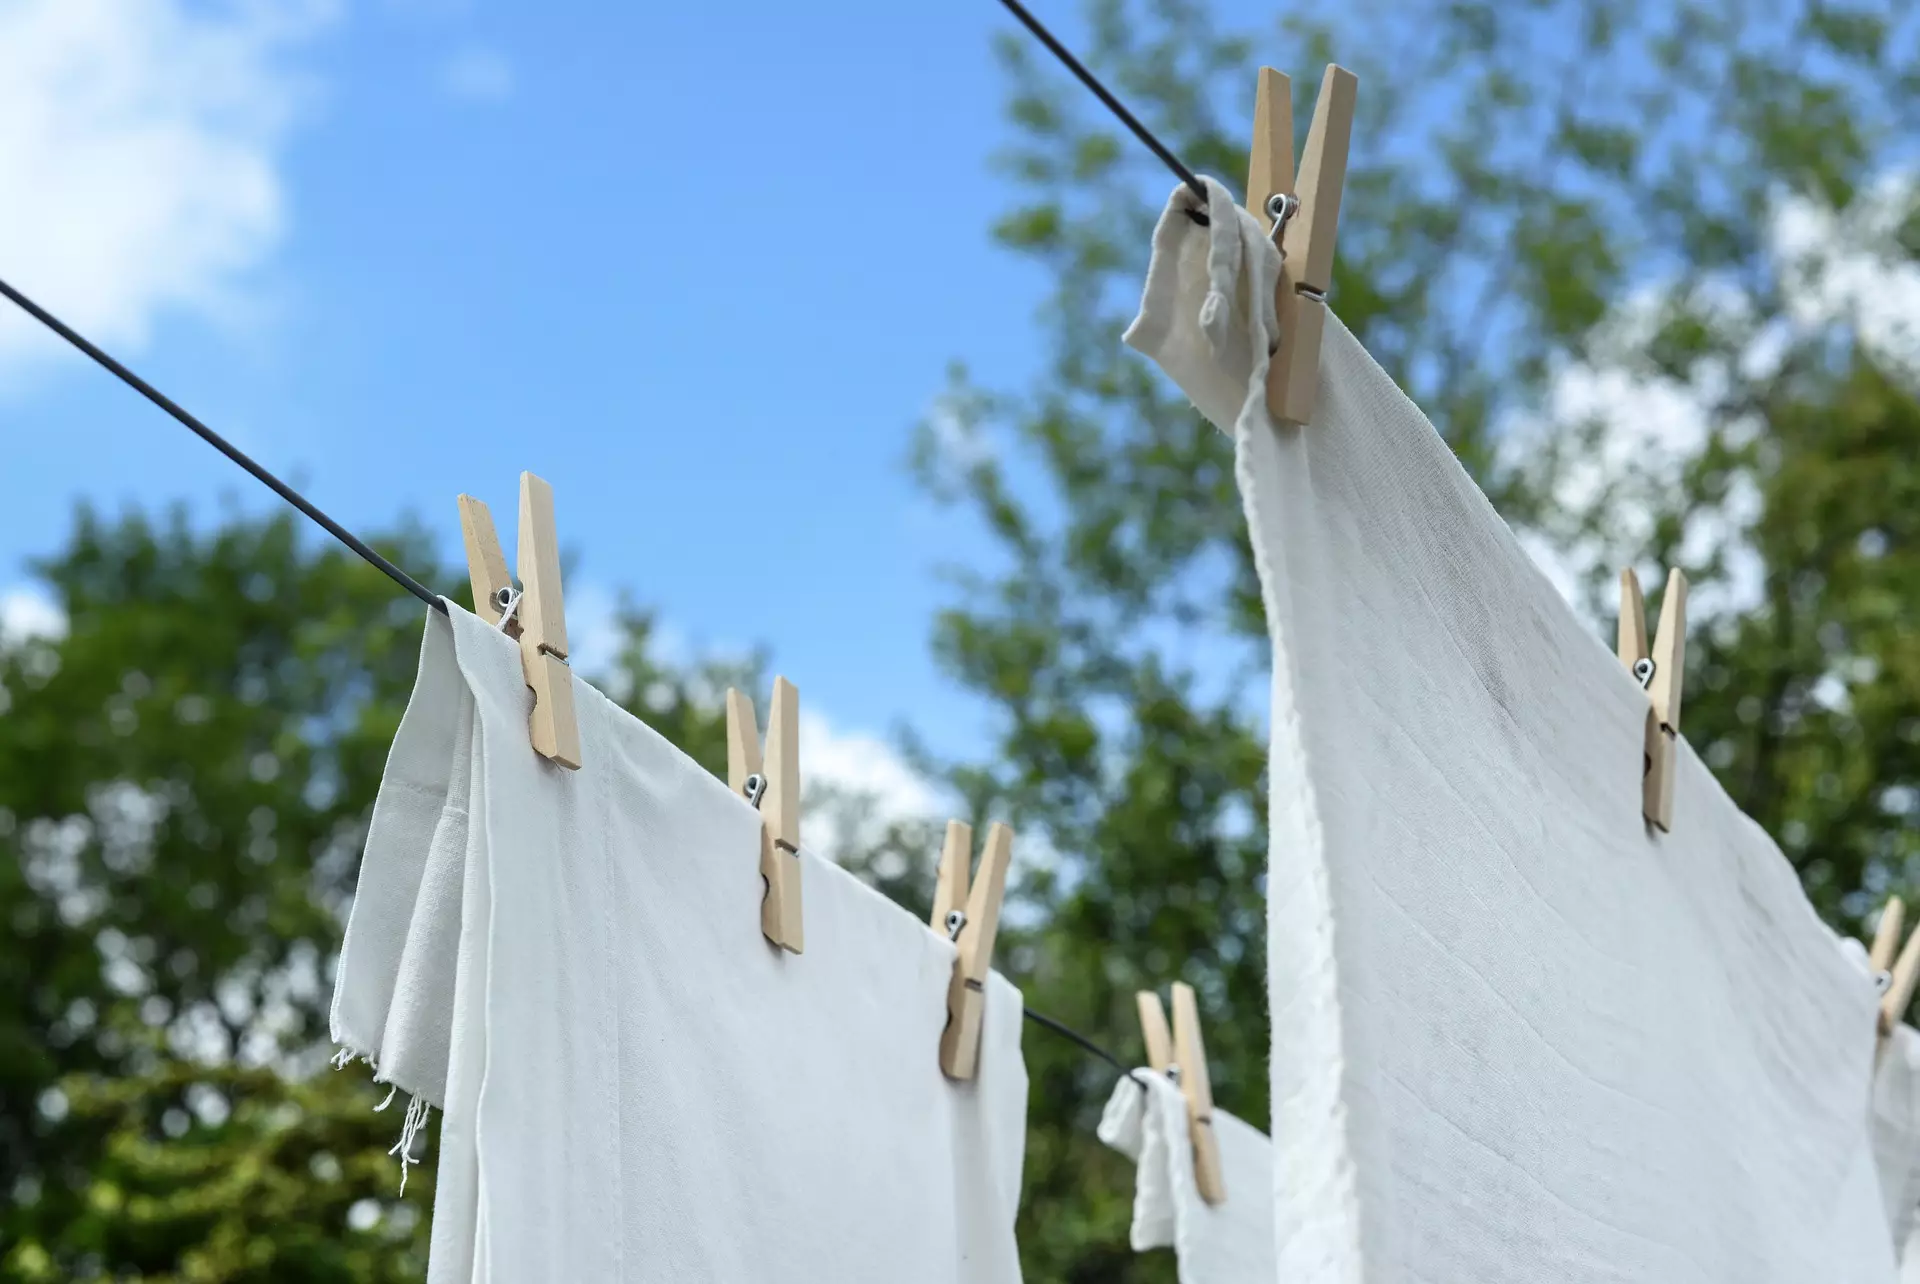 No need to worry if you don't have a garden to hang your clothes (